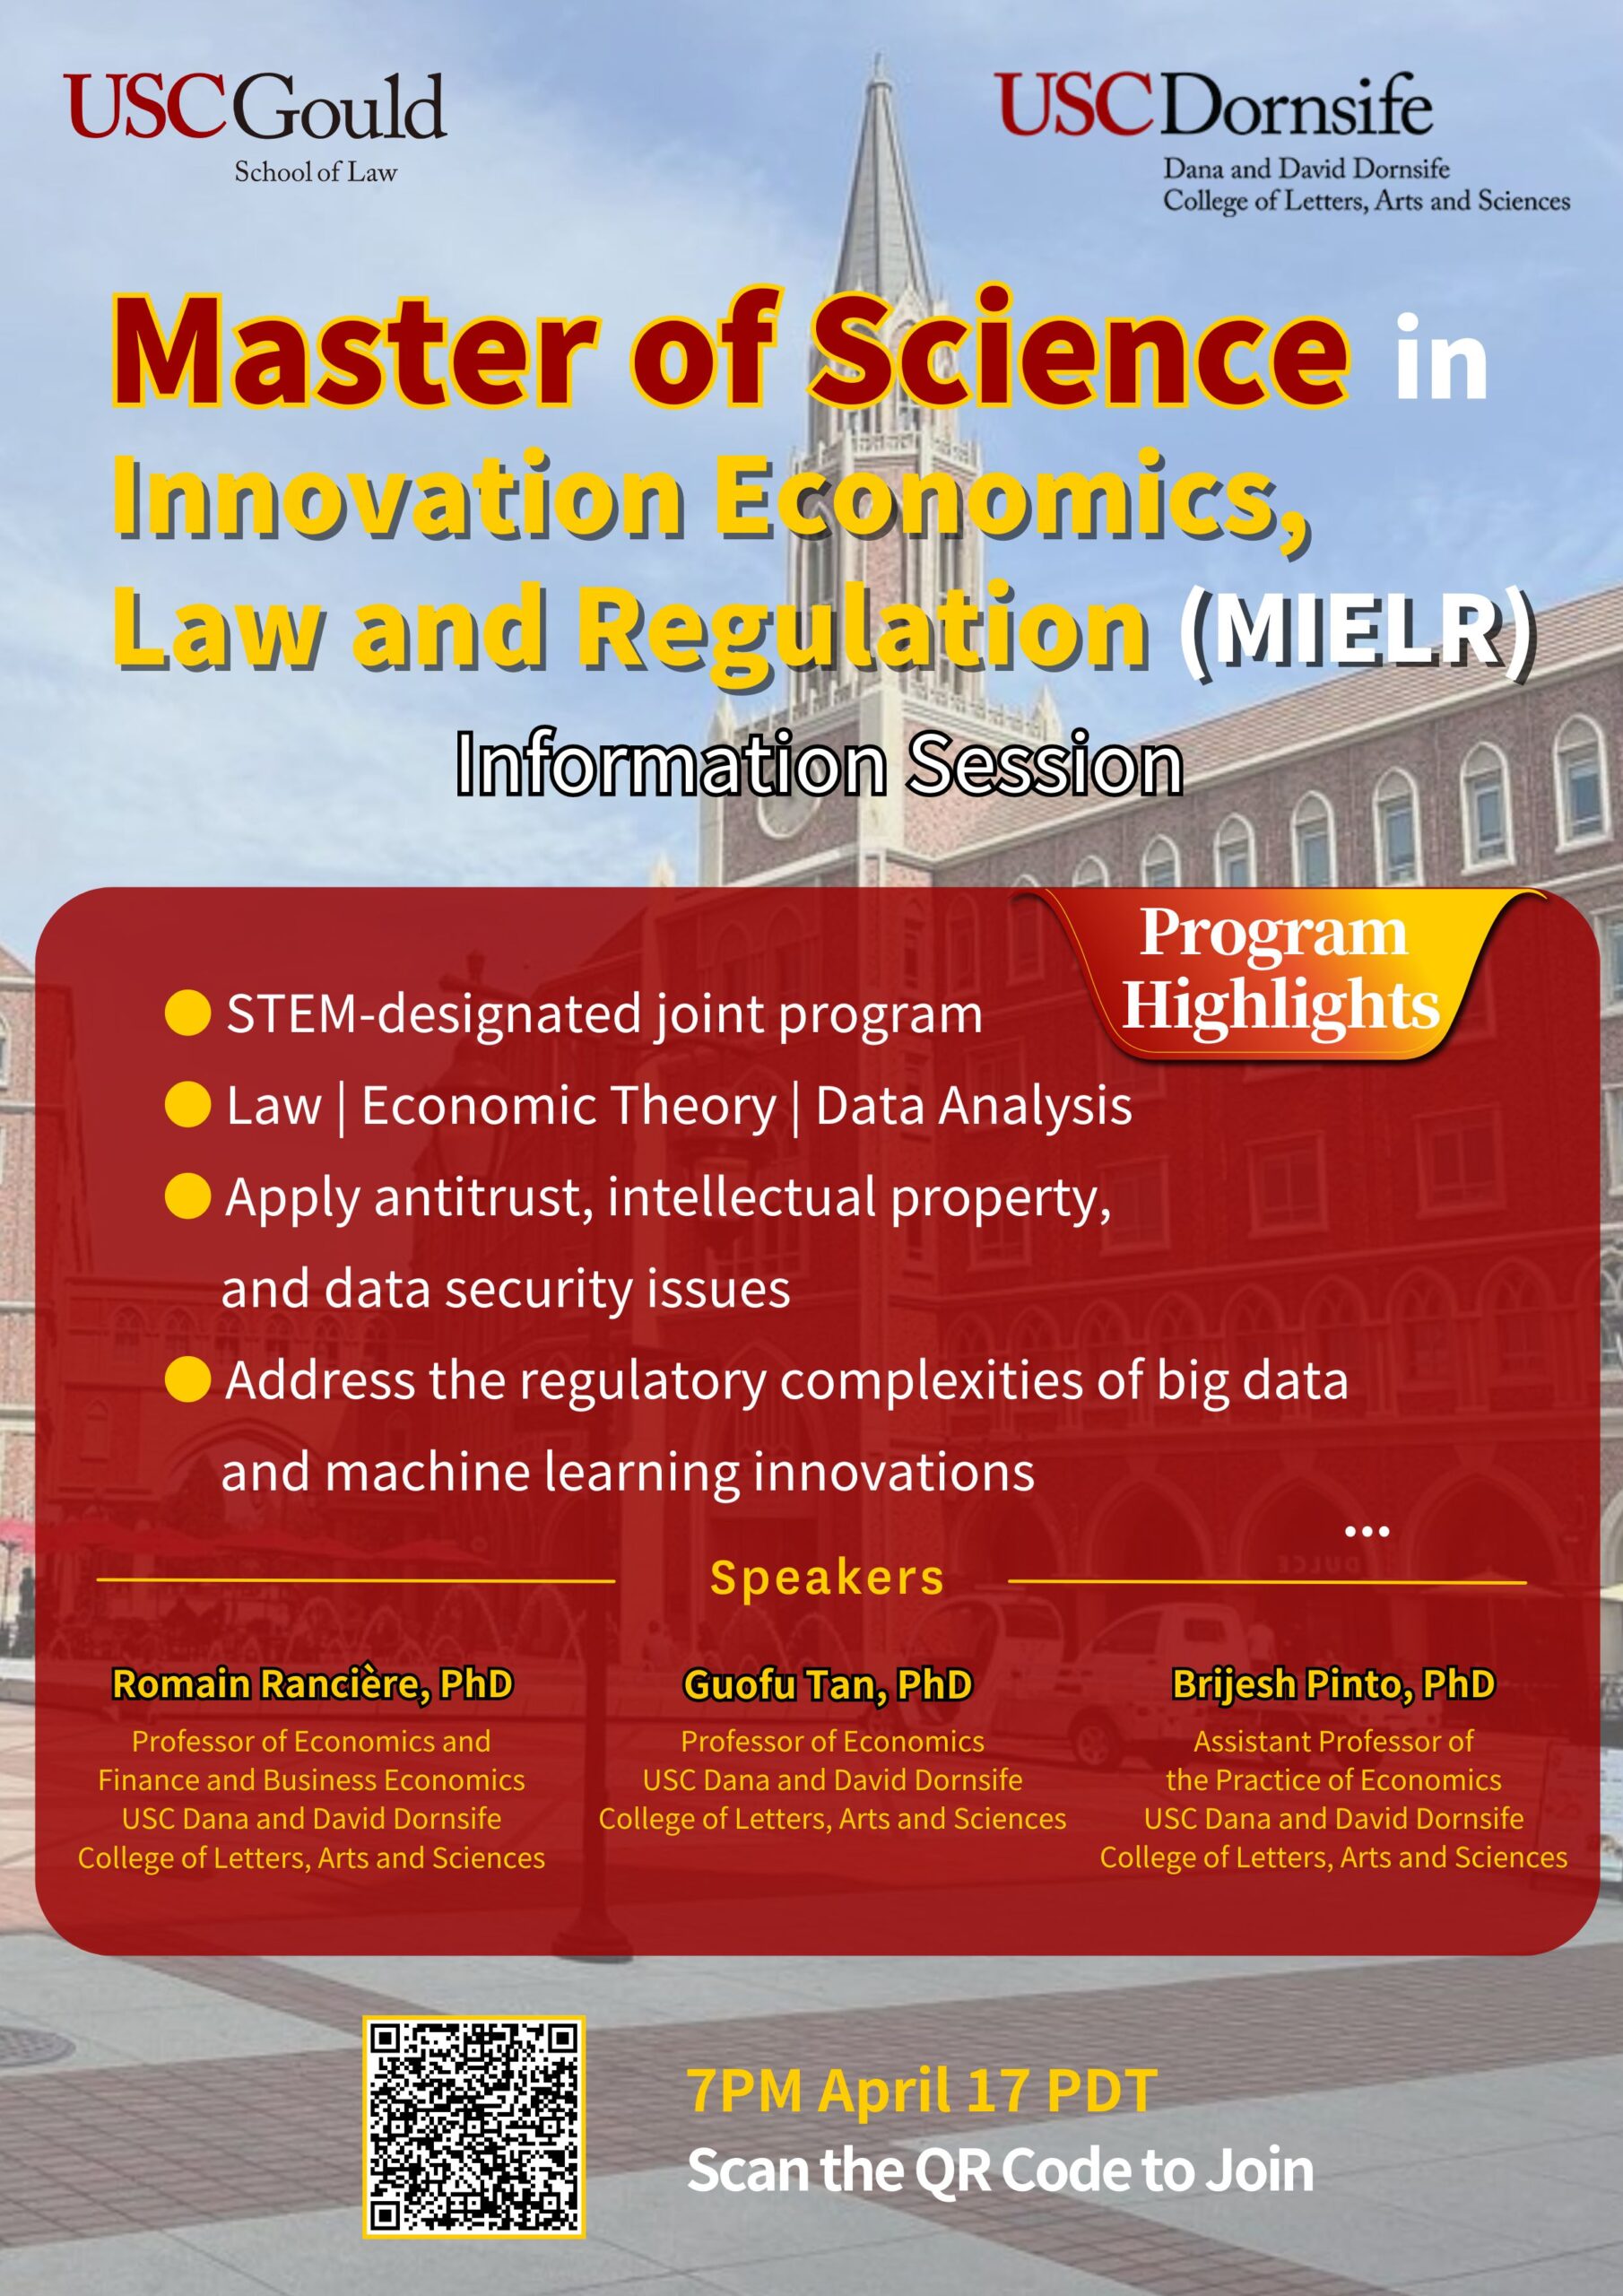 "Master of Science in Innovation Economics, Law and Regulation (MIELR) Information Session"